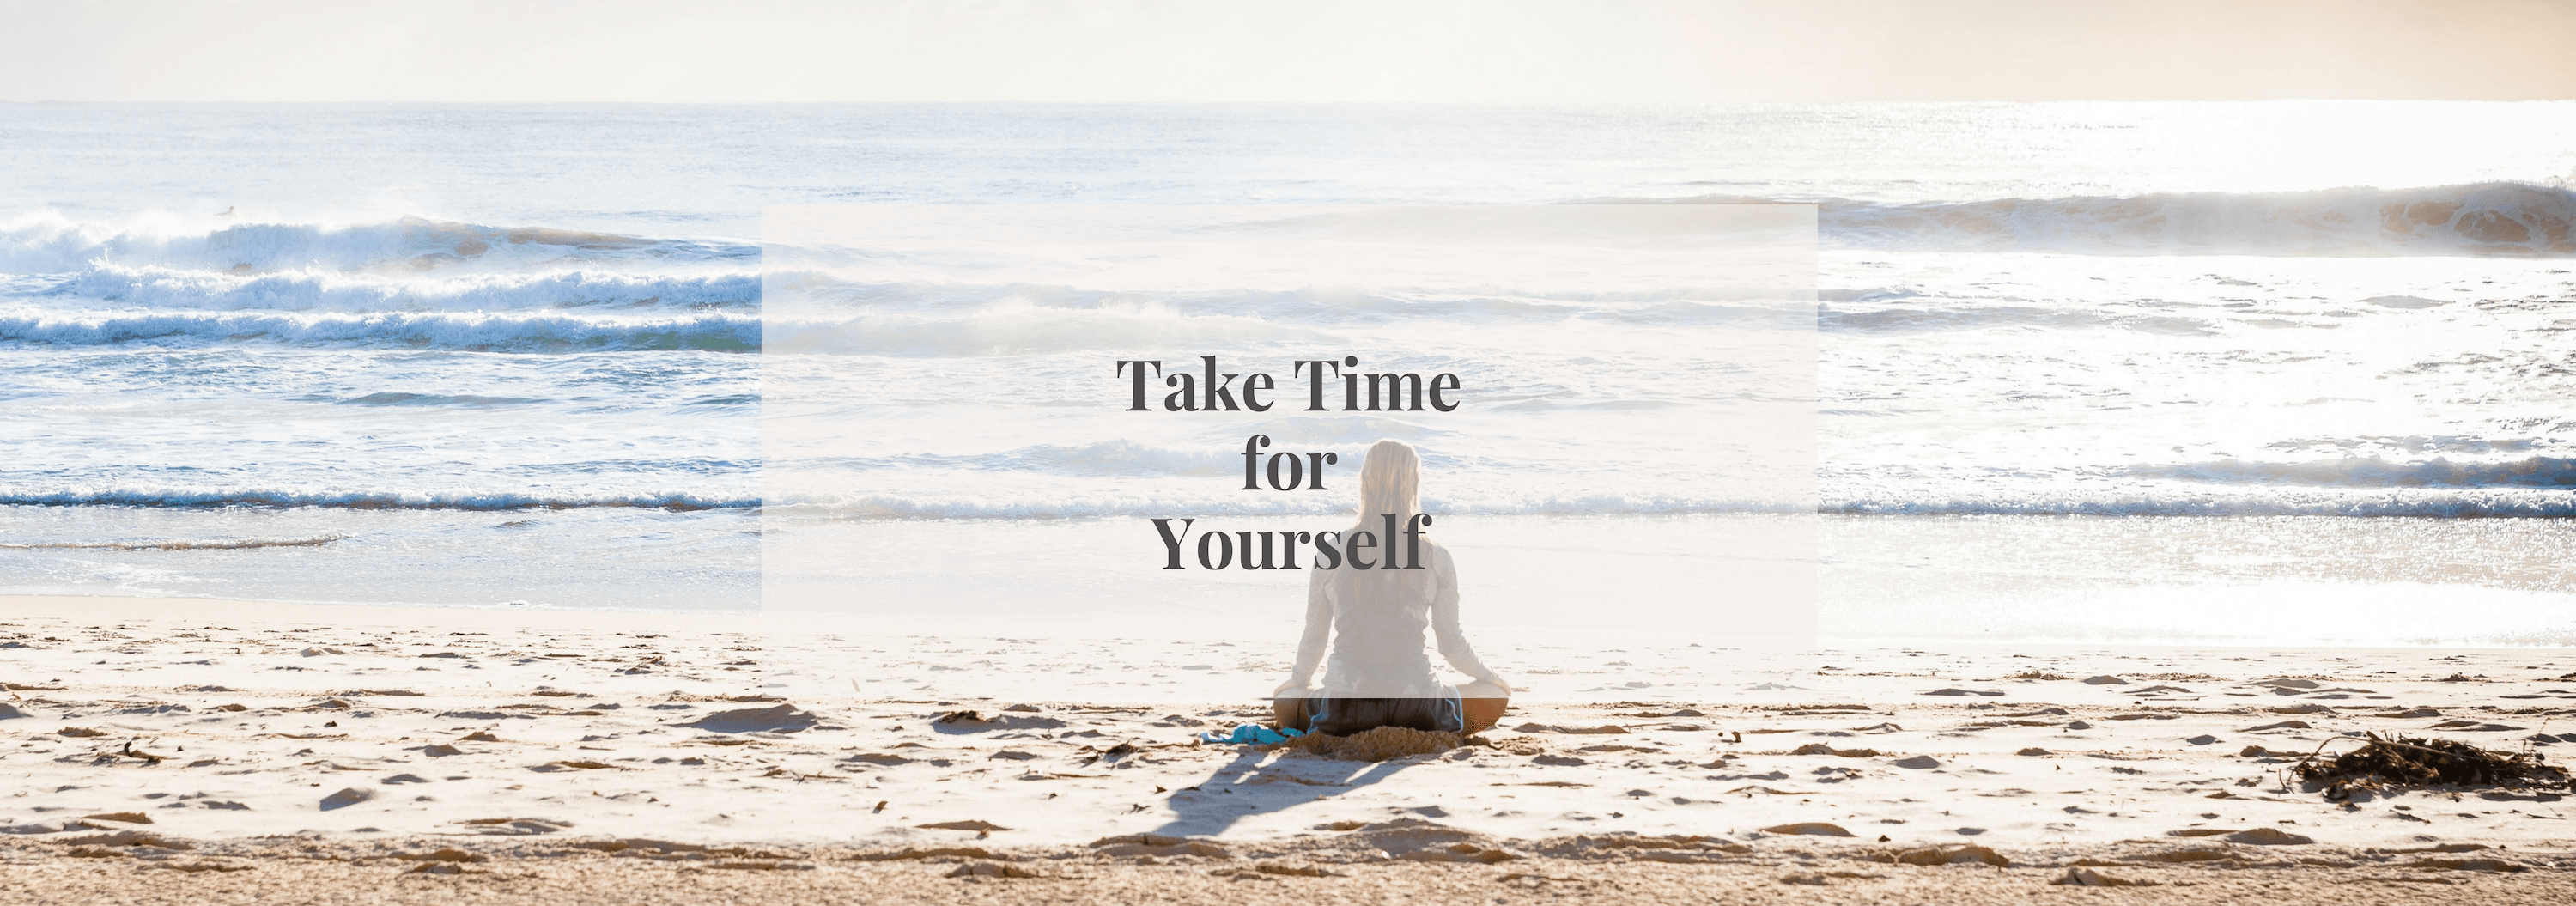 Take Time for Yourself - Numi